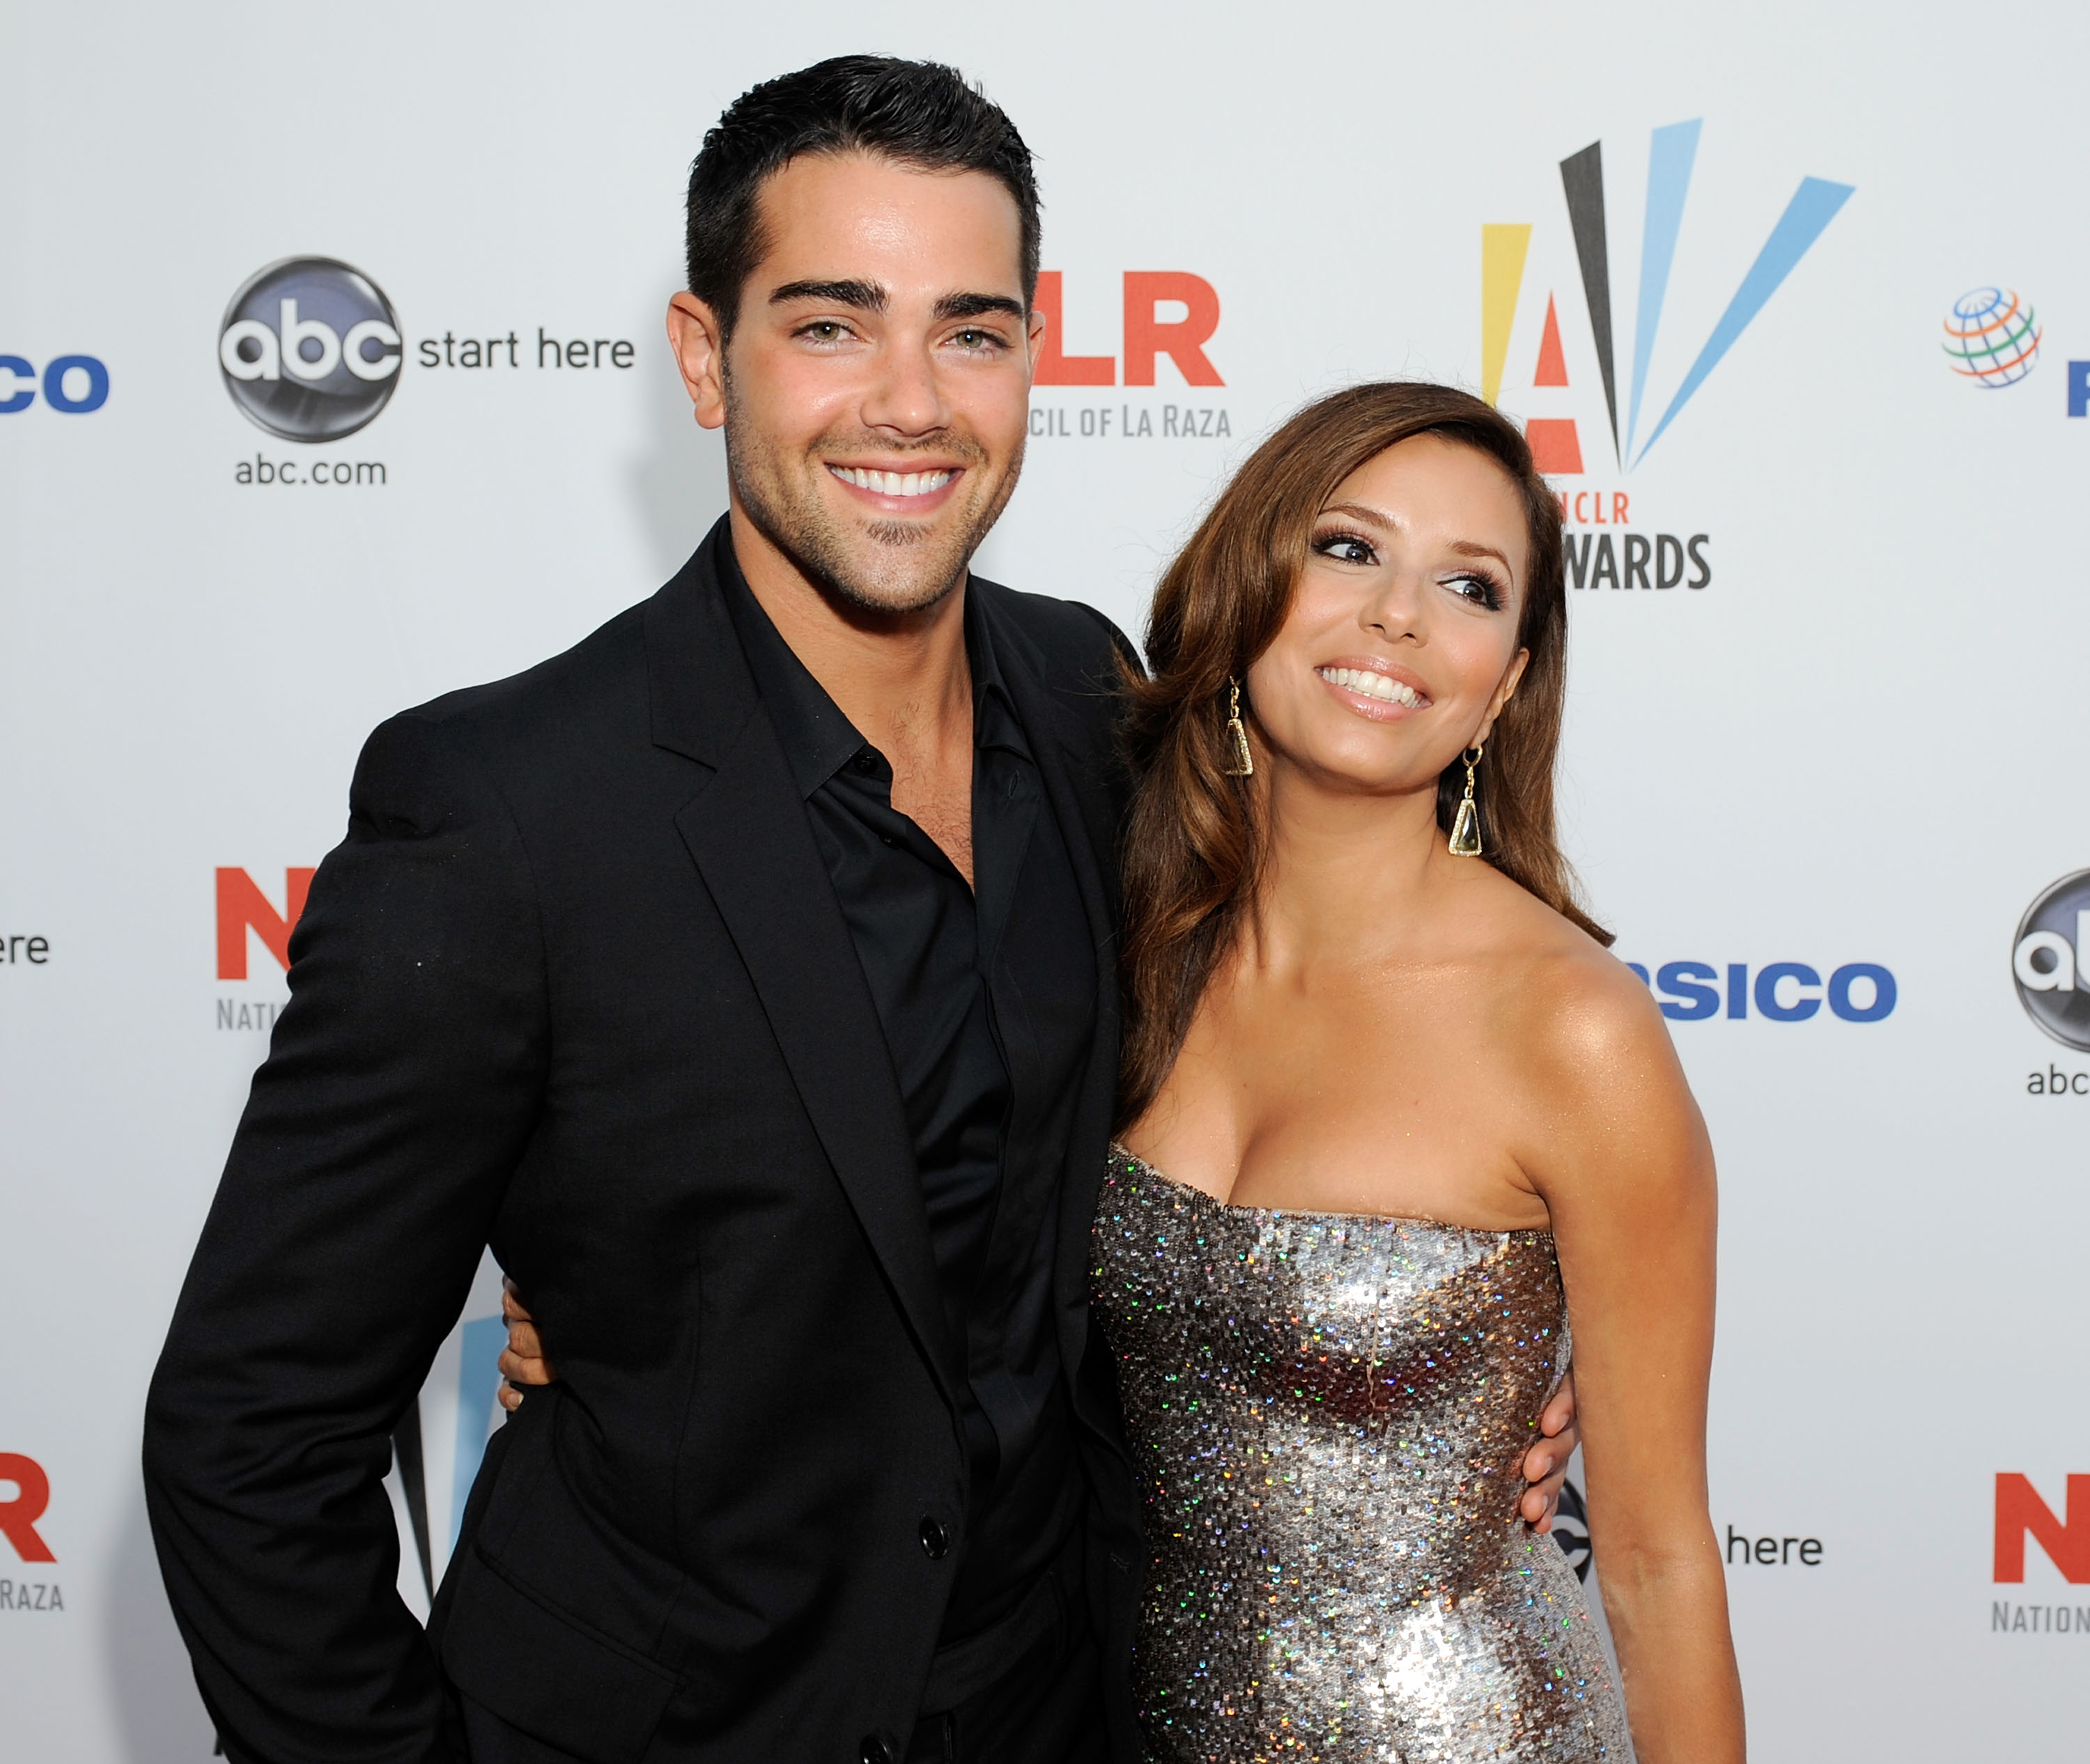 Jesse Metcalfe and Eva Longoria at the ALMA Awards in Los Angeles, California on September 17, 2009 | Source: Getty Images